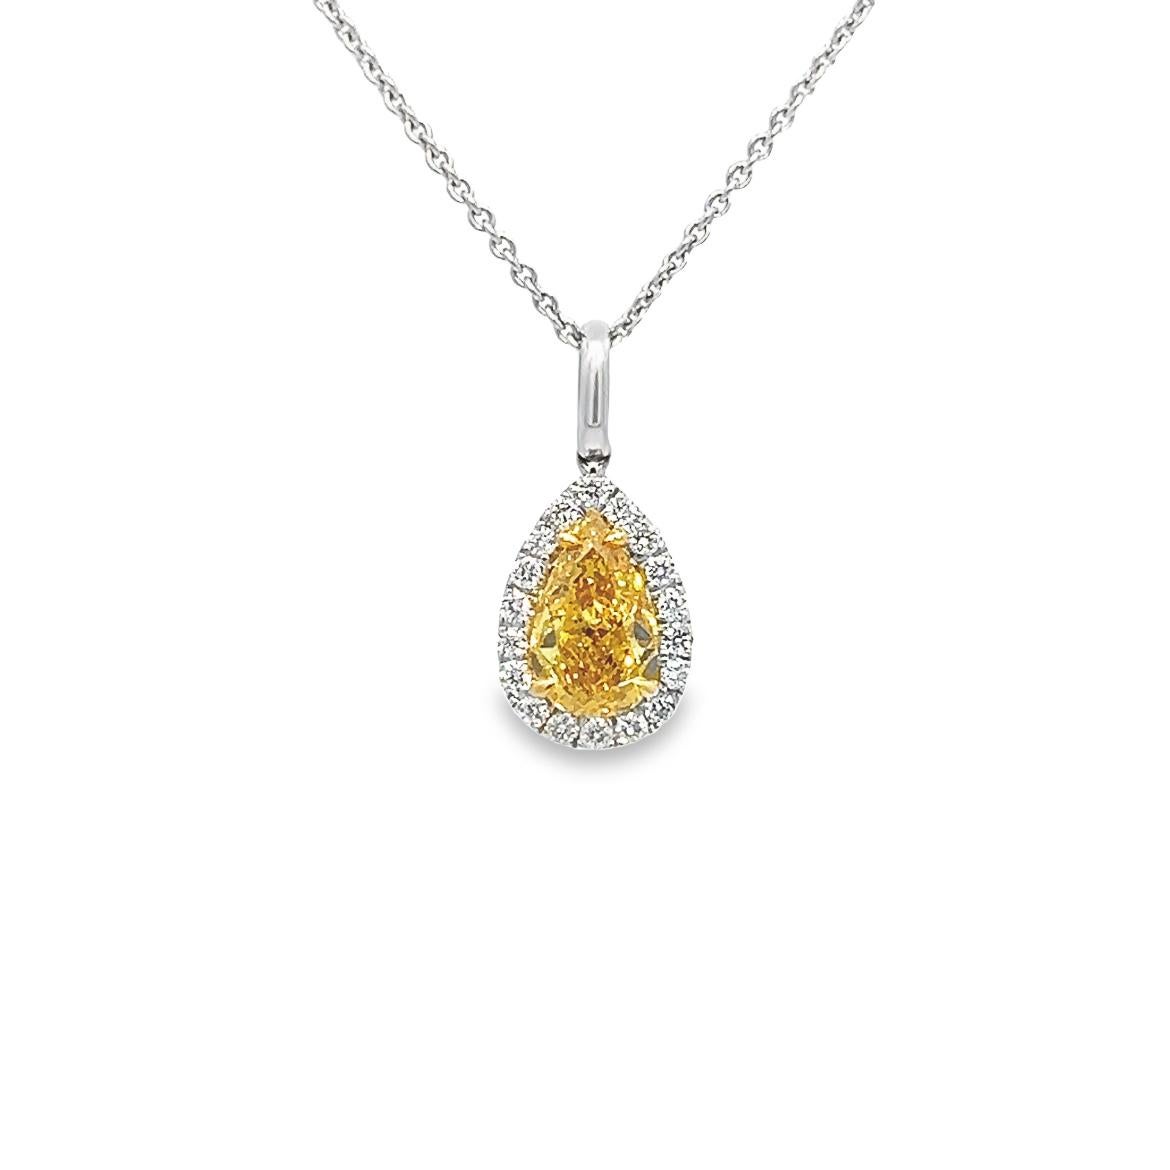 Get your hands on a truly unique piece of jewelry - a stunning 0.90ct Fancy Vivid Orangy Yellow pear-shaped diamond pendant, certified by GIA with an SI2 clarity rating. This rare Diamond is beautifully complemented by a ring of round brilliant